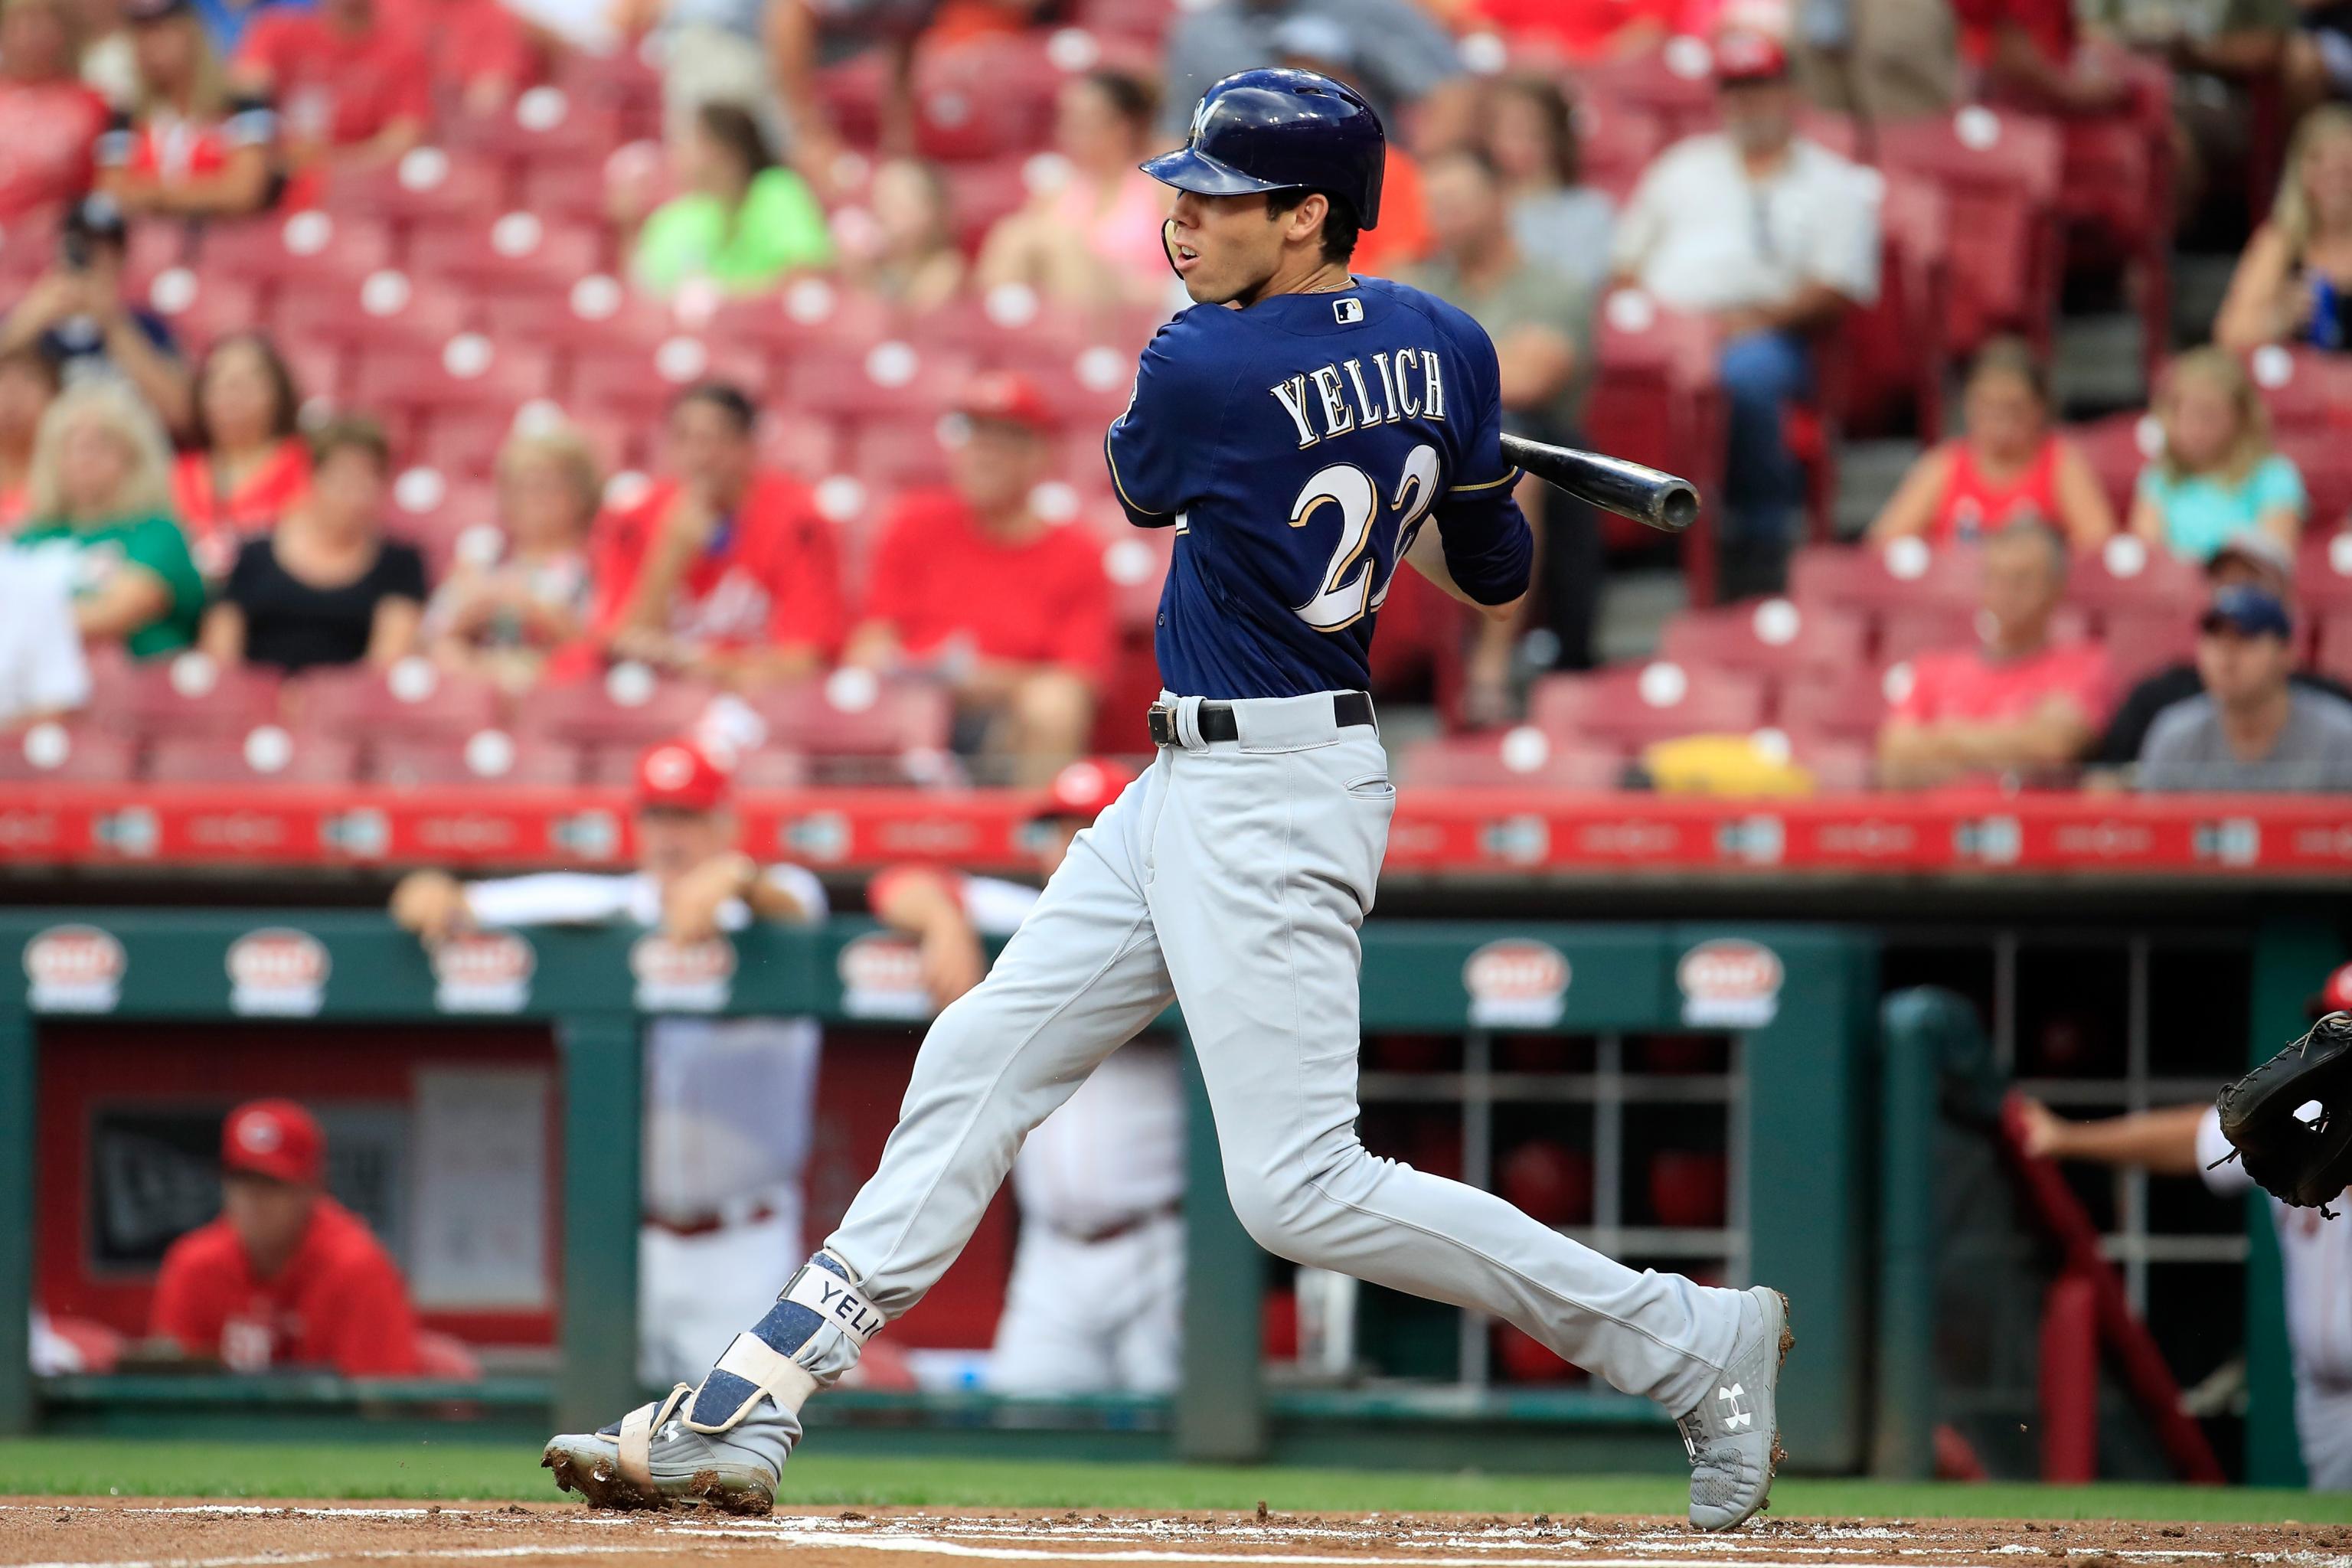 Christian Yelich, other Milwaukee Brewers players to hit for the cycle